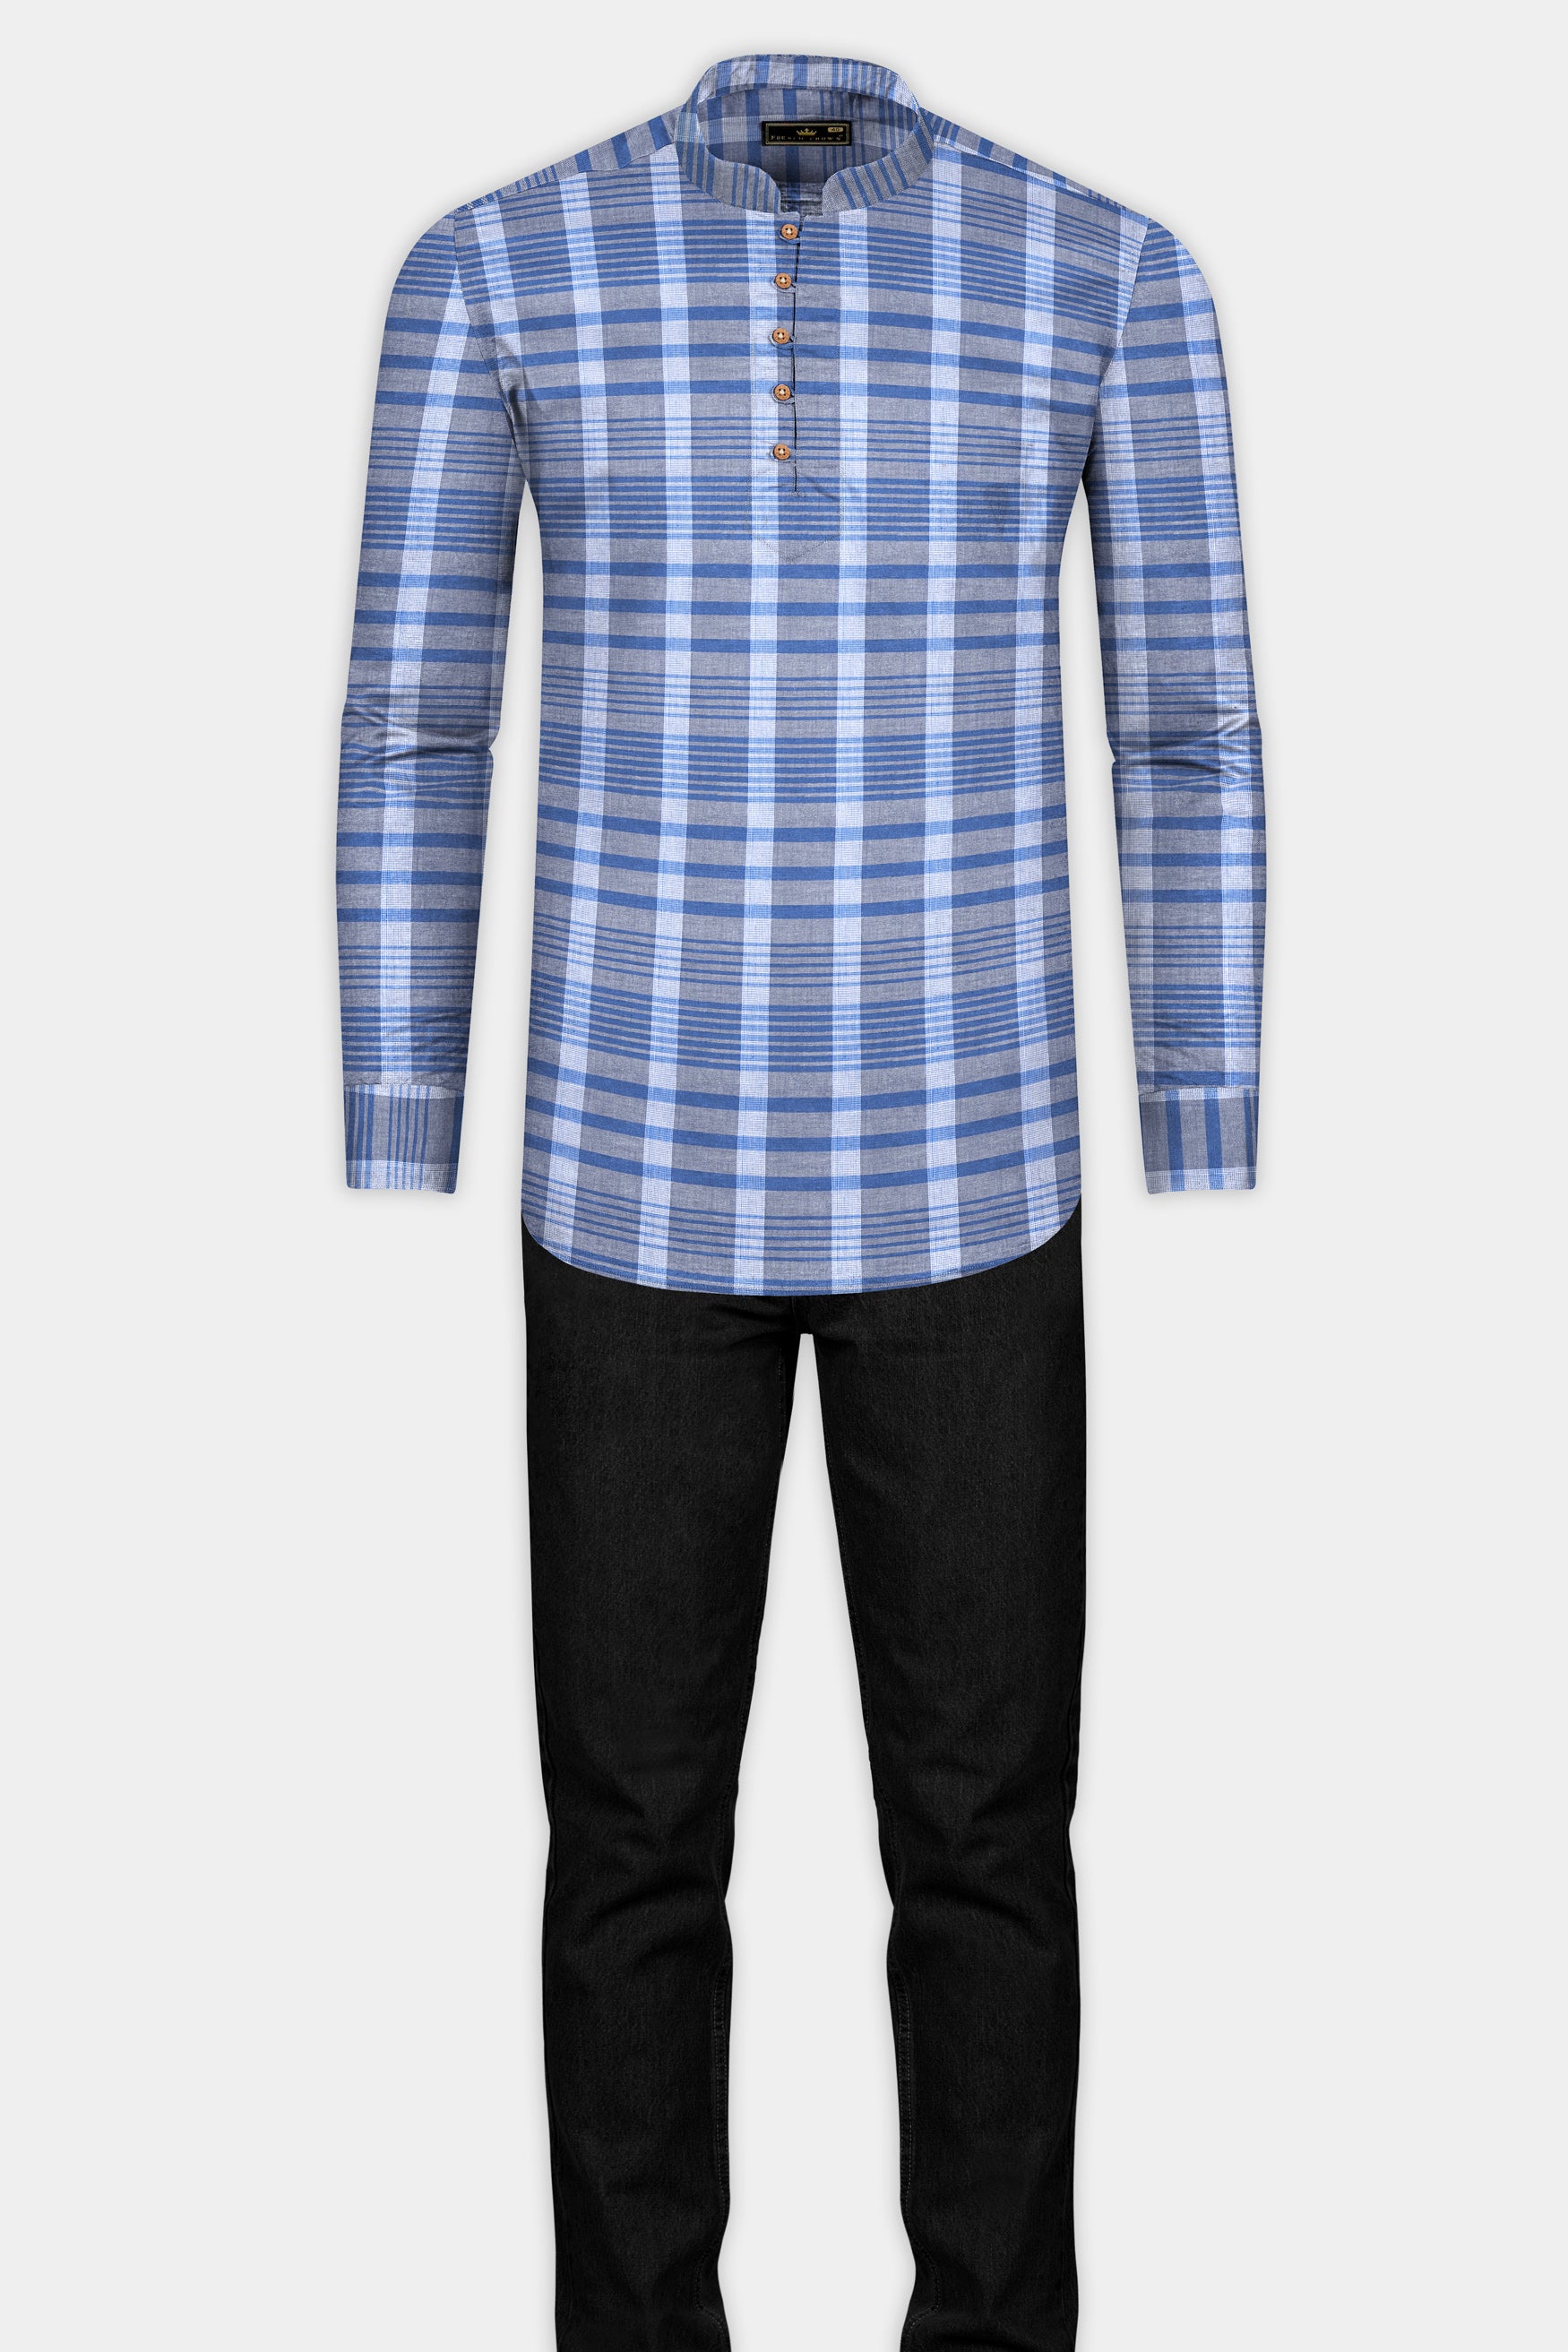 Tufts Blue and Cadet blue Plaid Chambray Textured Premium Cotton Shirt